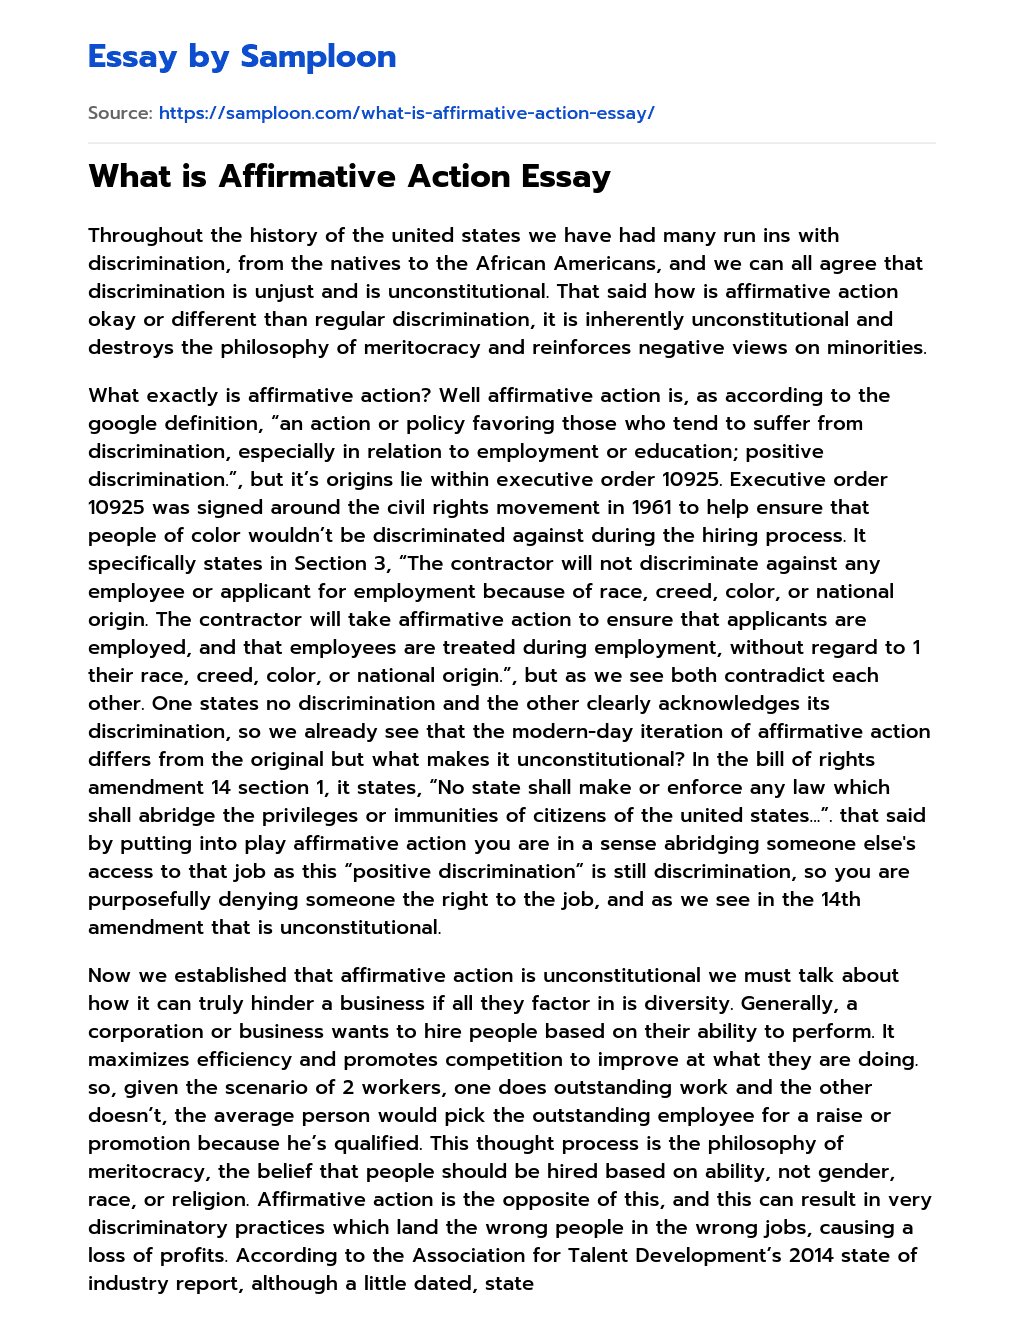 What is Affirmative Action Essay essay